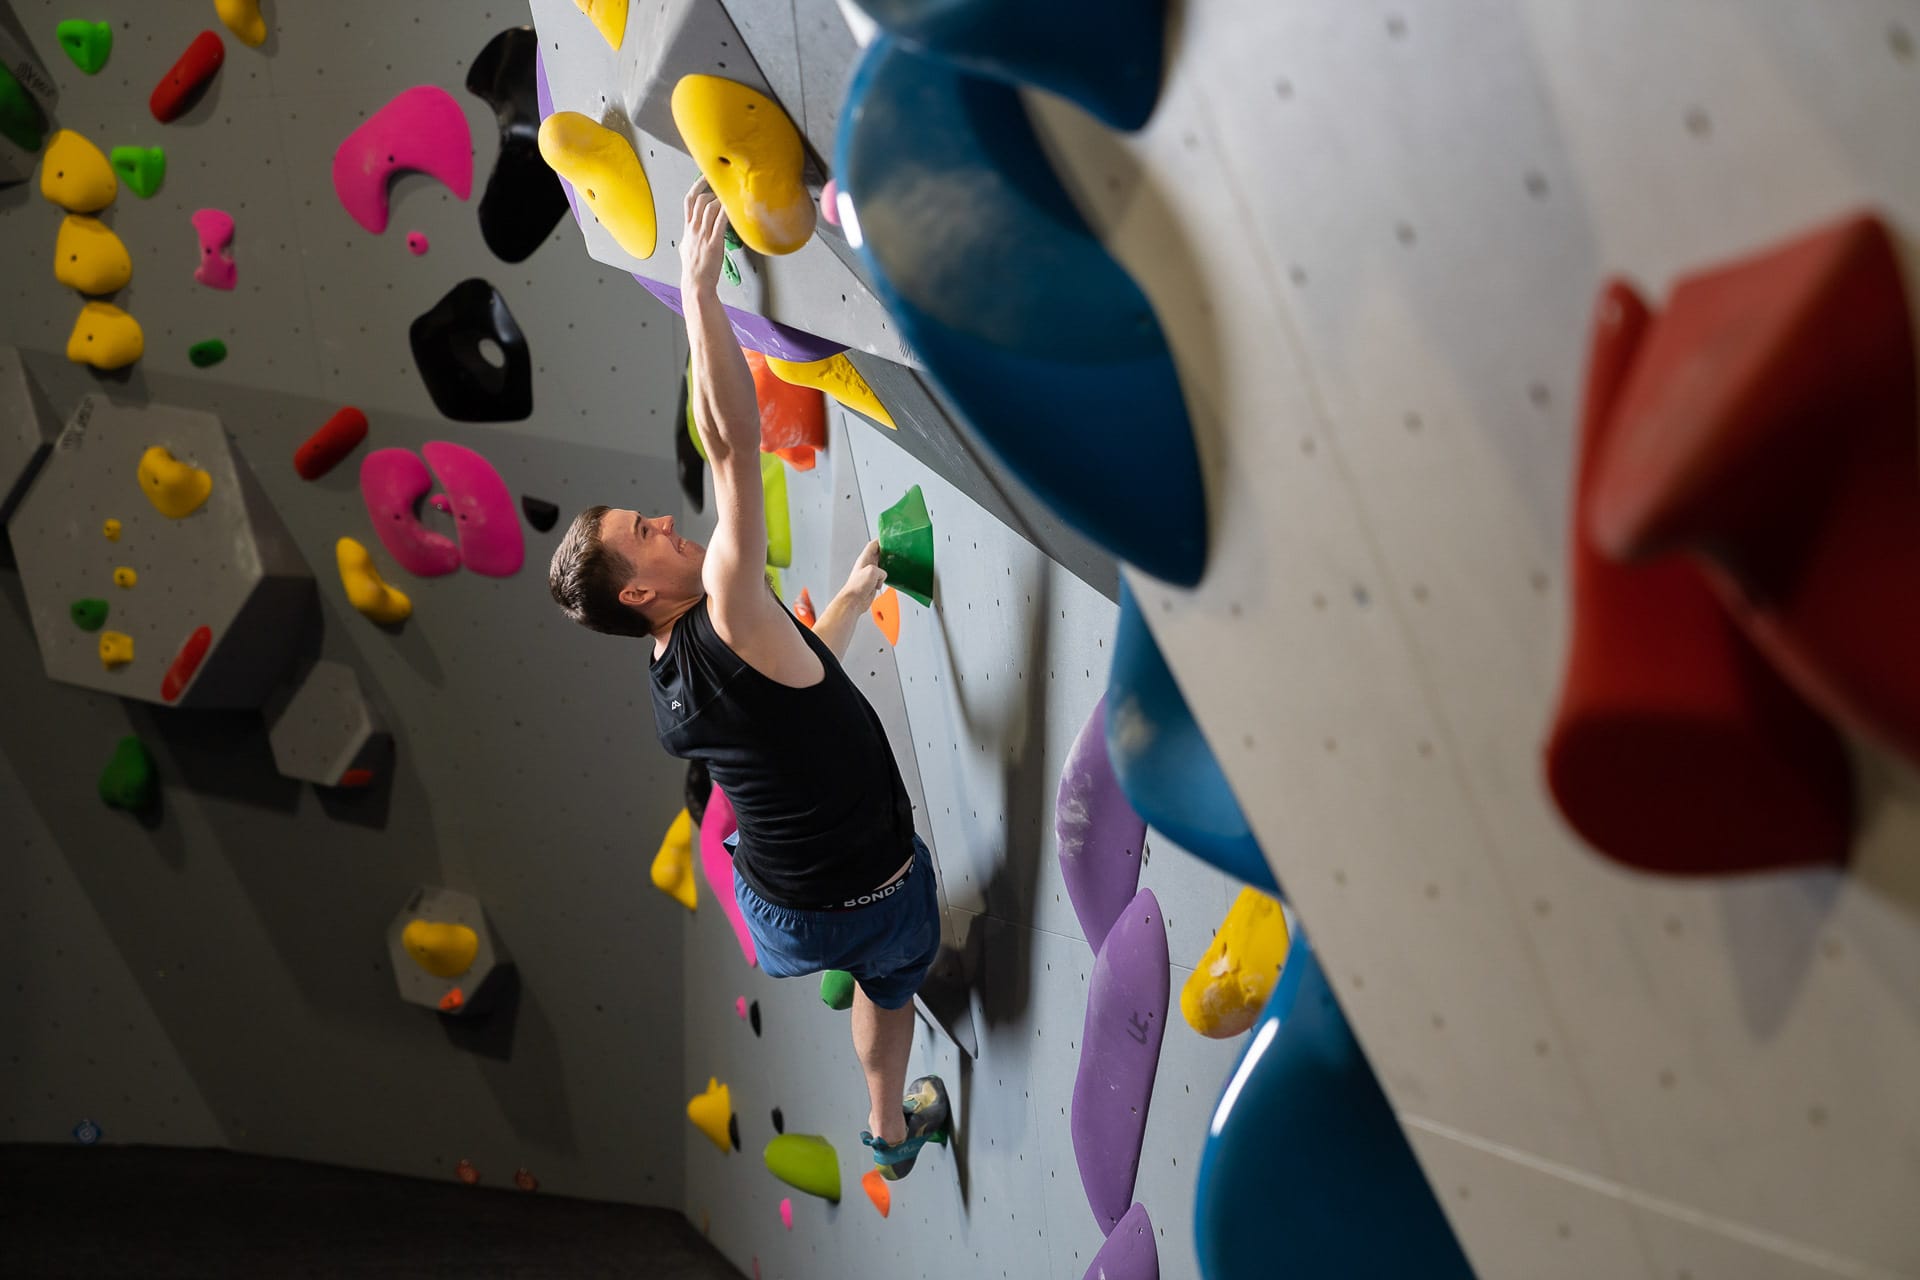 Sydney Has A New Rock Climbing Gym! (After A Two Year Wait), climb fit macquarie, bouldering